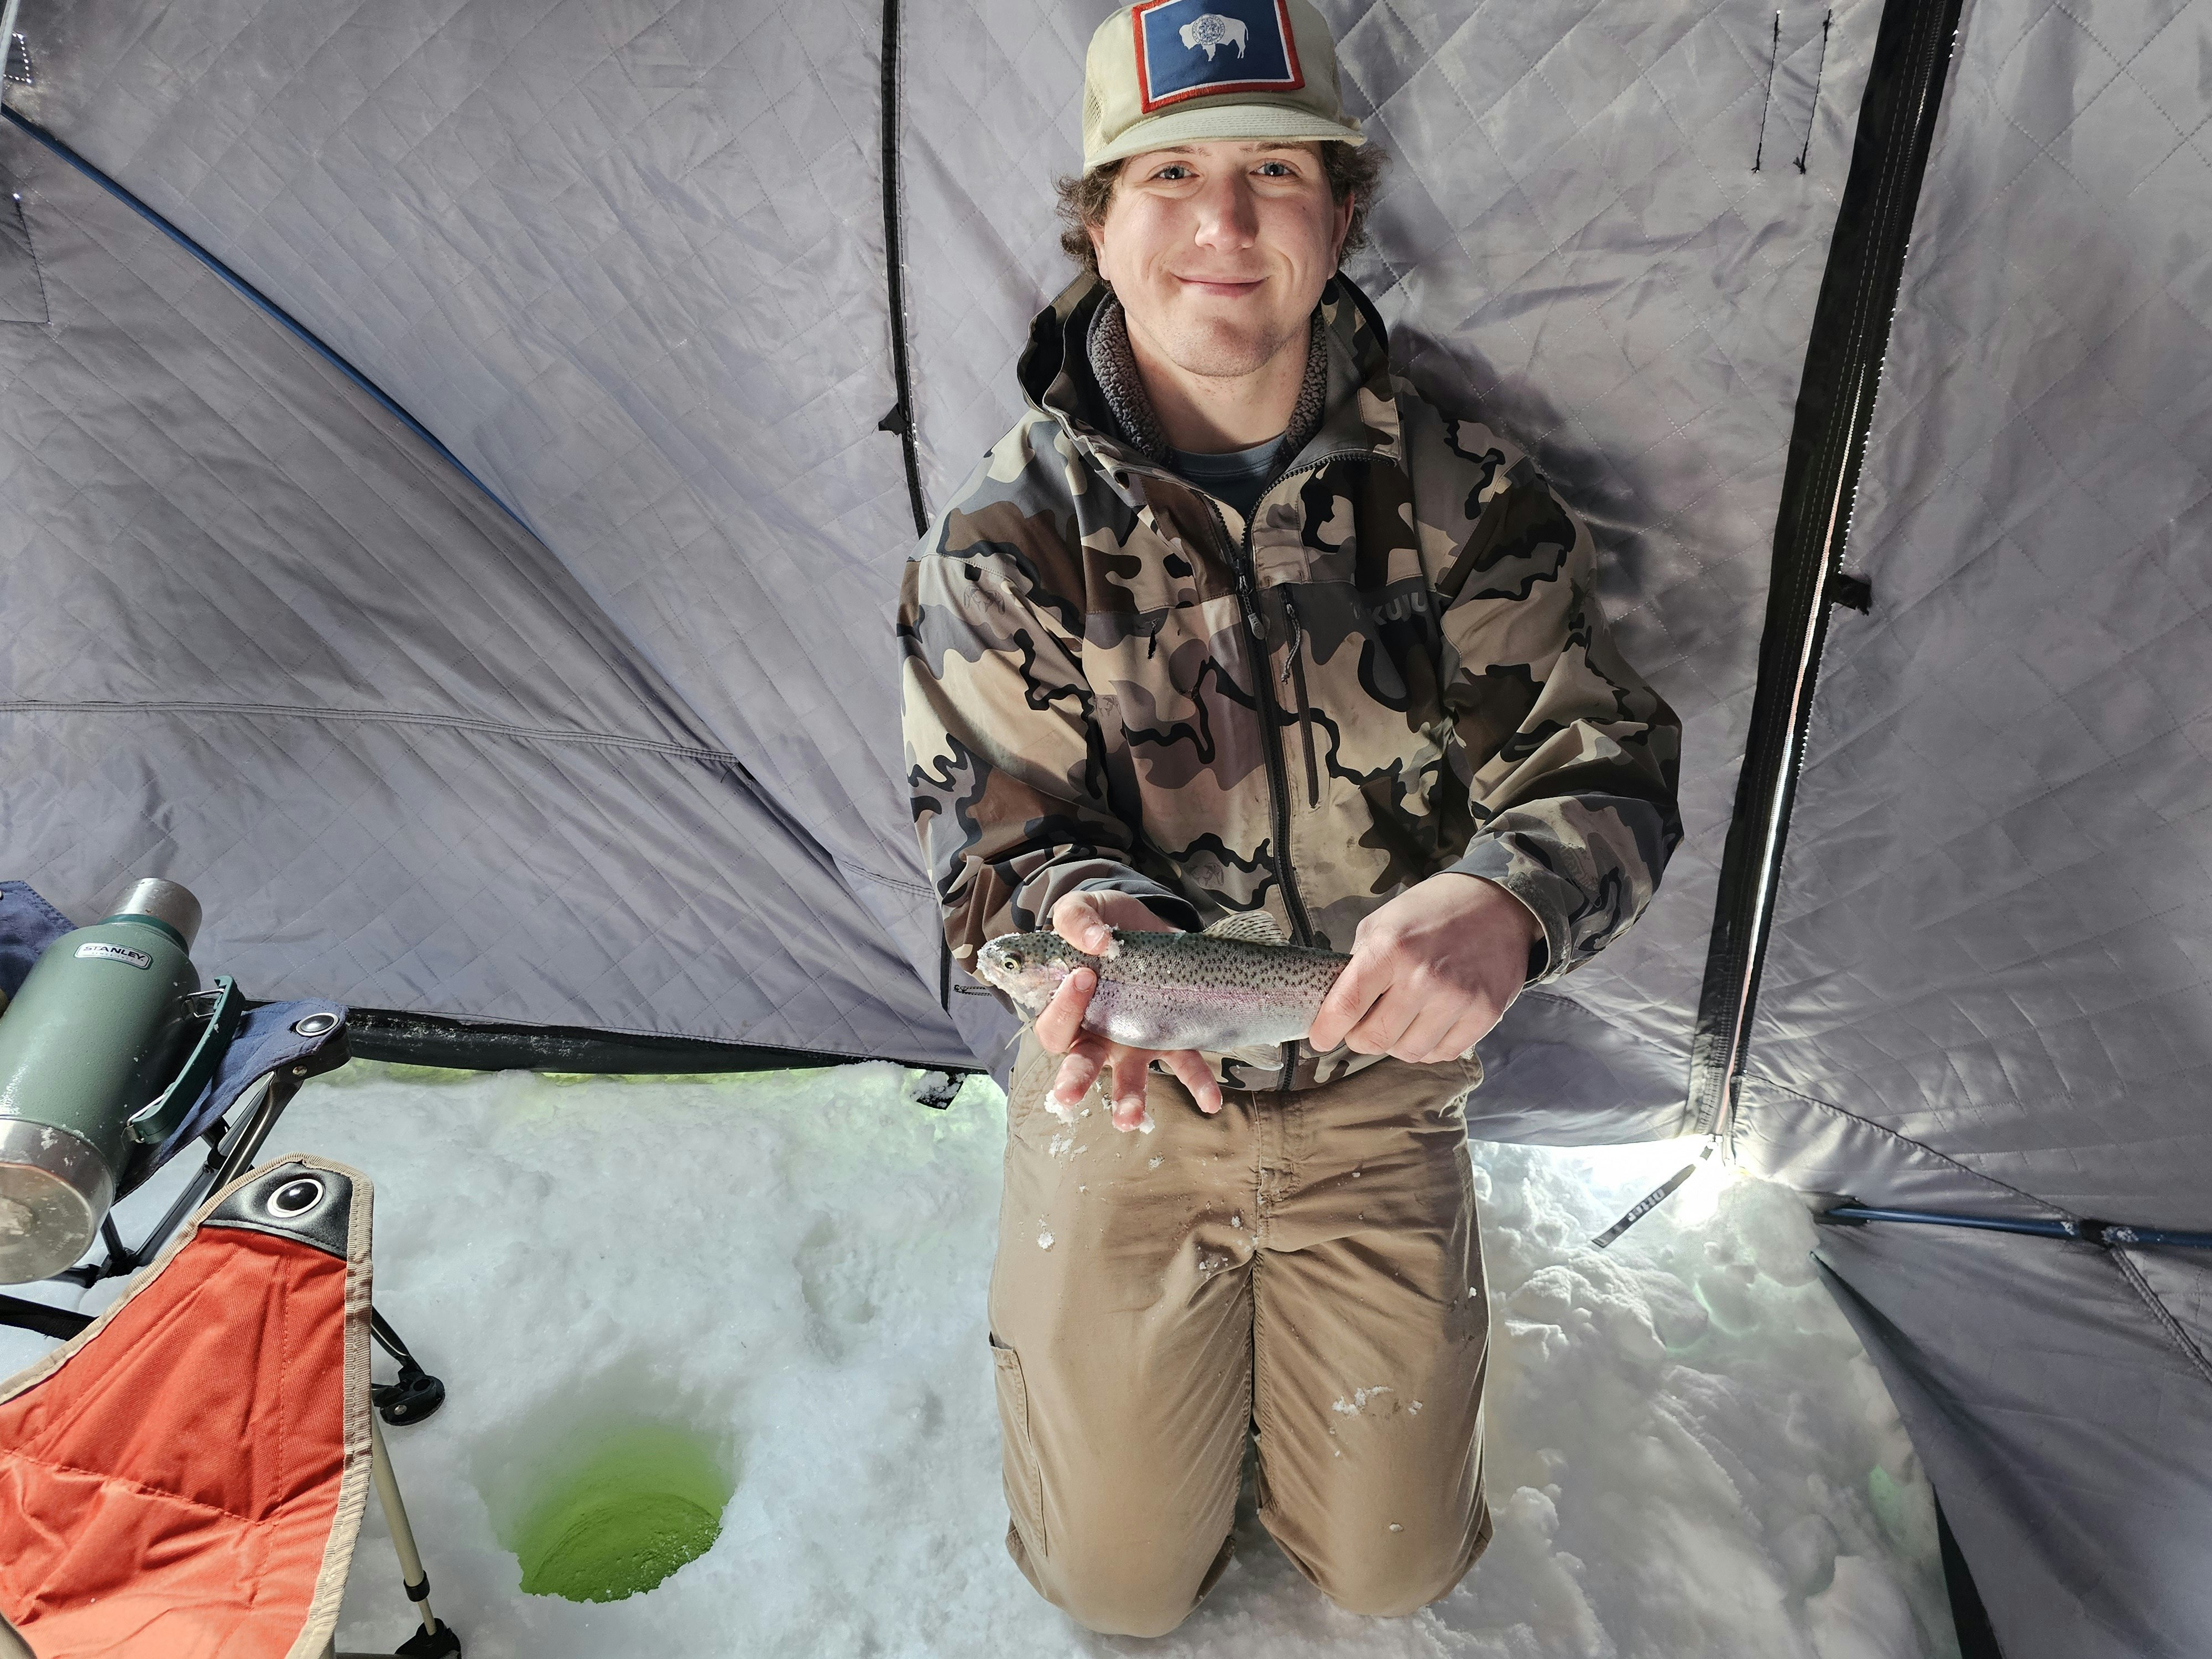 The trout that didn't get away held by ice fishing guide Isaac Jones from Mississippi. If you catch 'em, the chef at Brooks Lake Lodge will cook 'em.